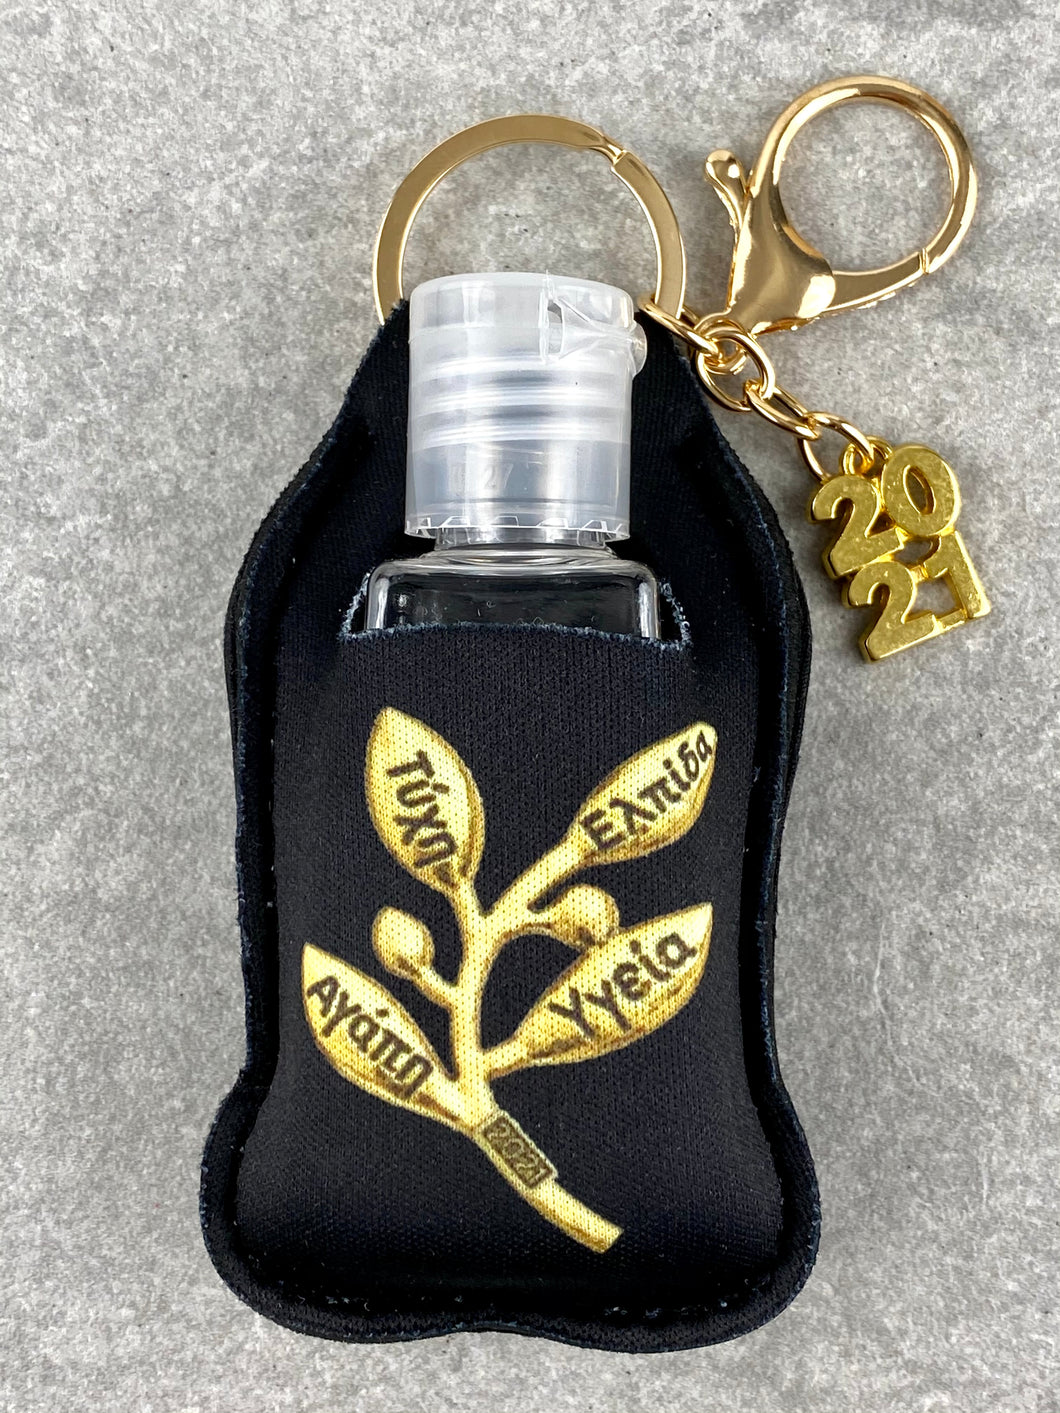 Hand Sanitizer Pouch Keychain with Olive Leaf HS5